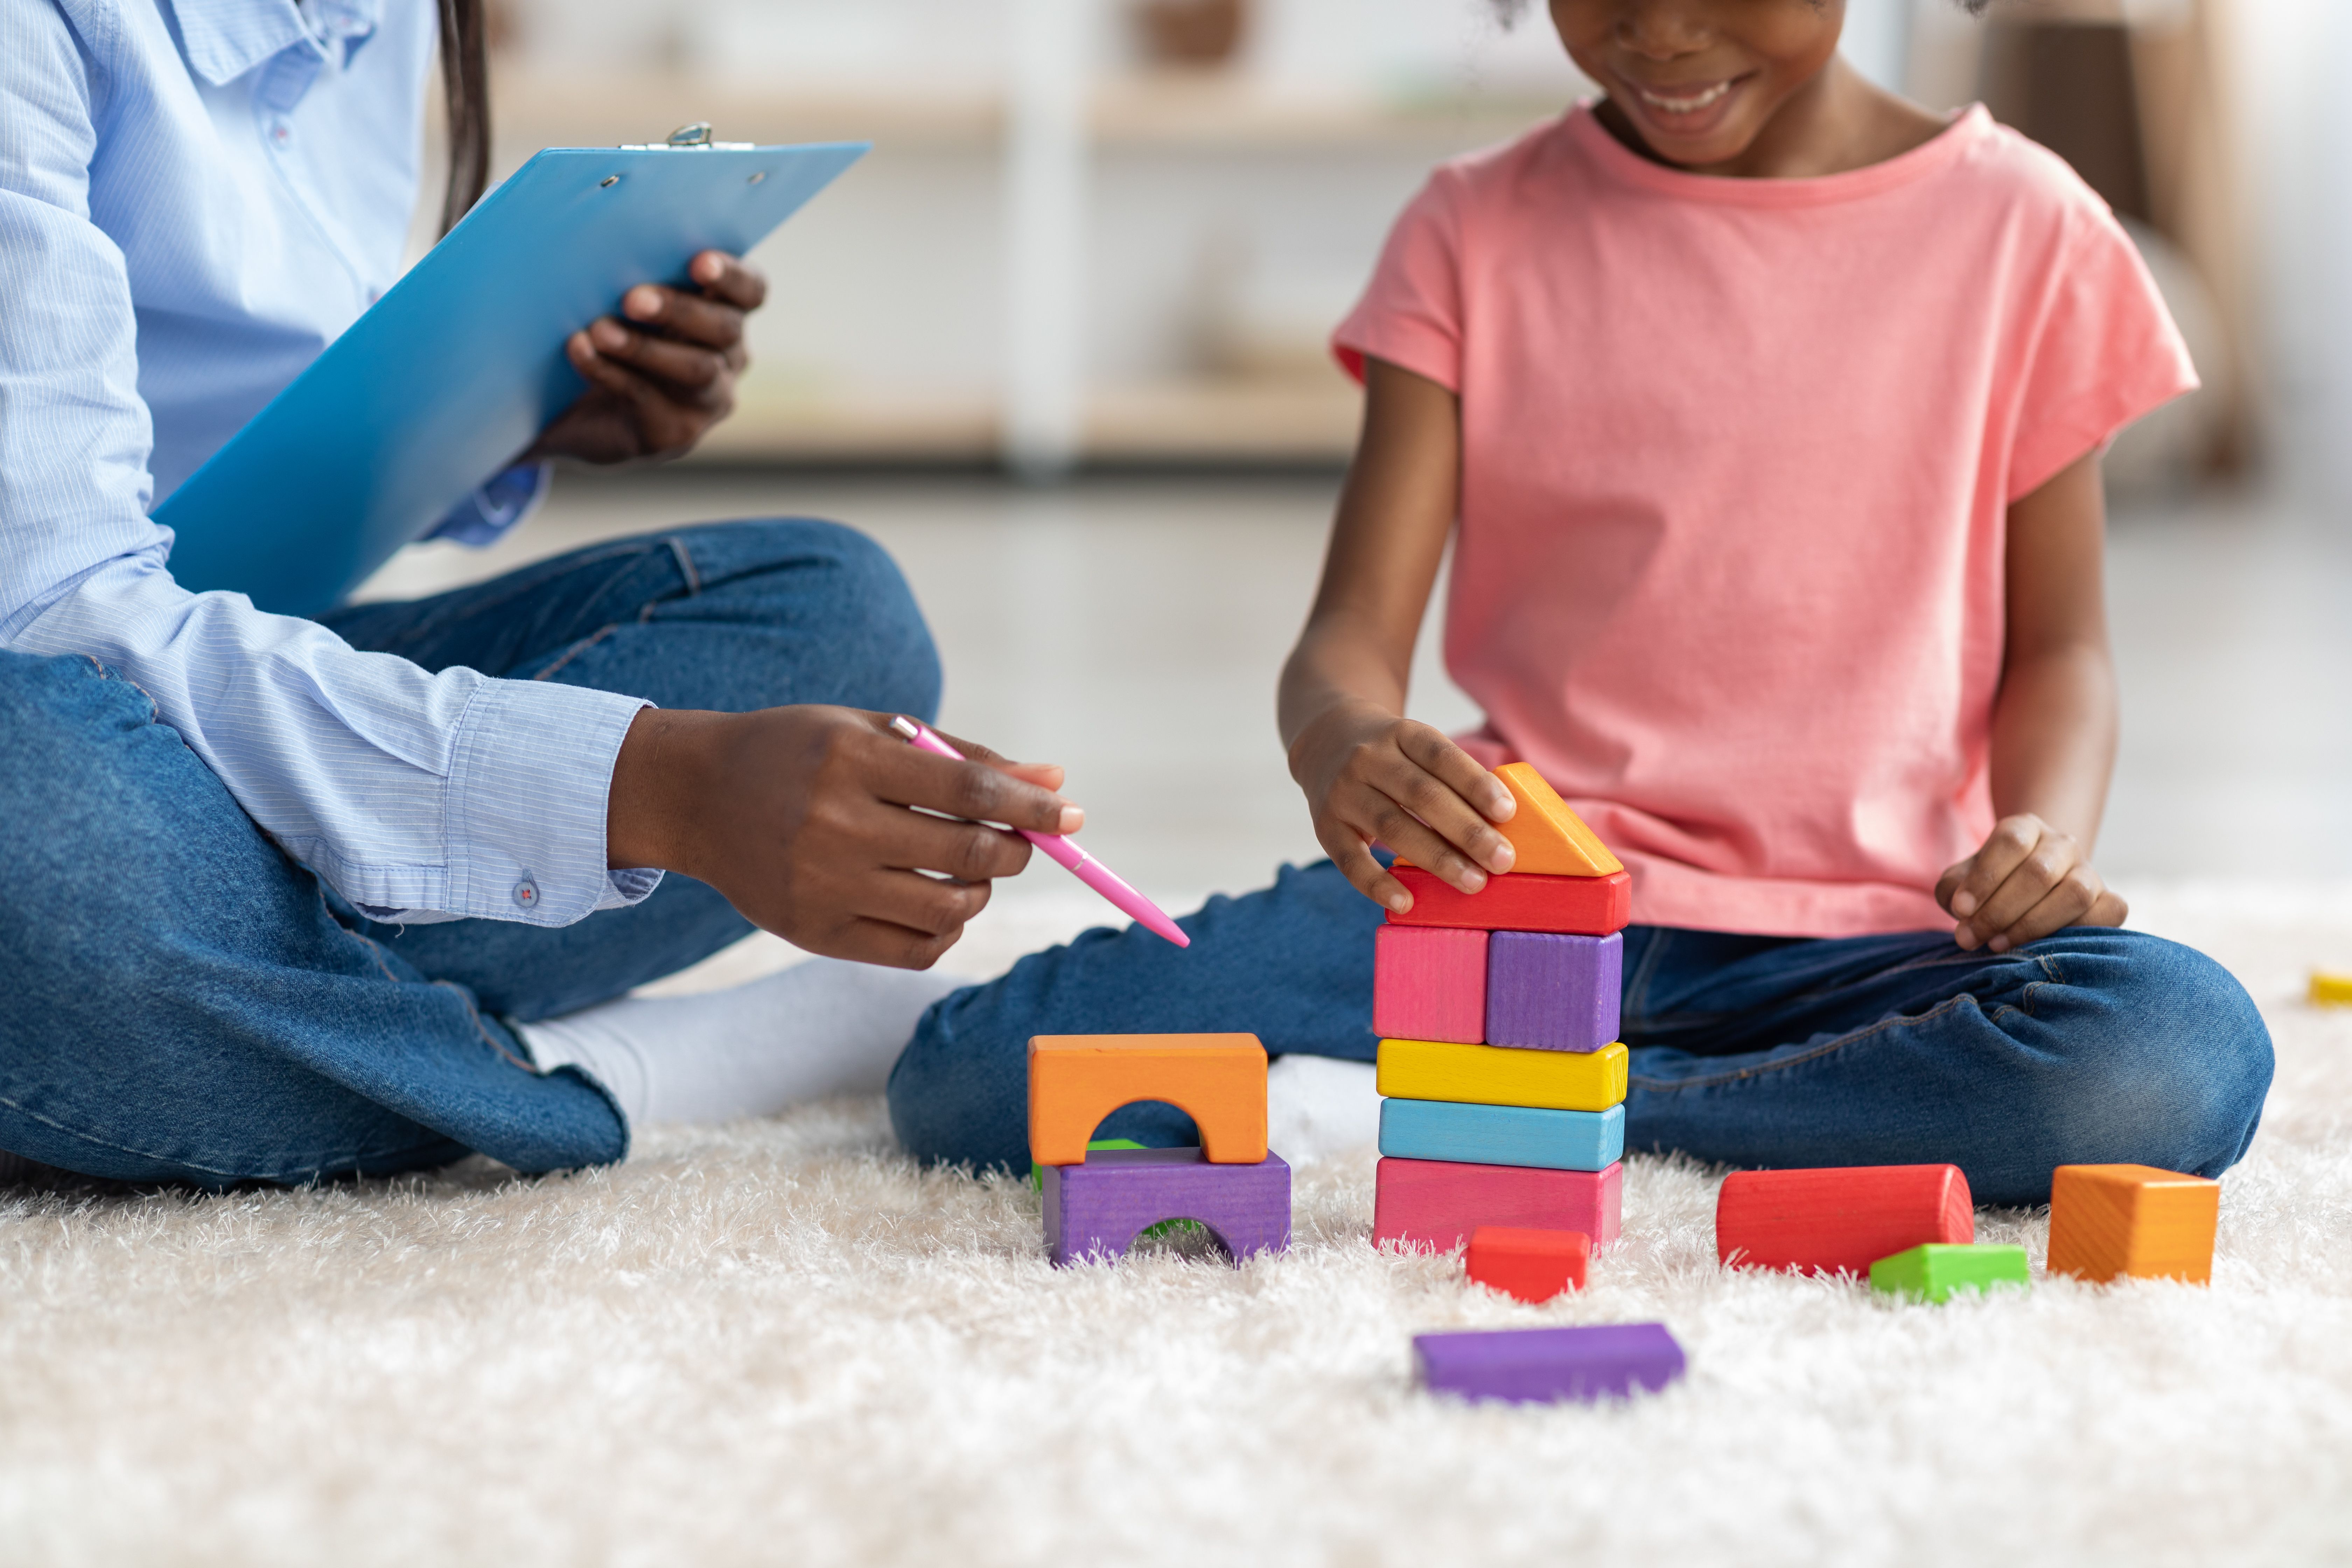 Image of a child playing with colorful blocks being observed by a woman.